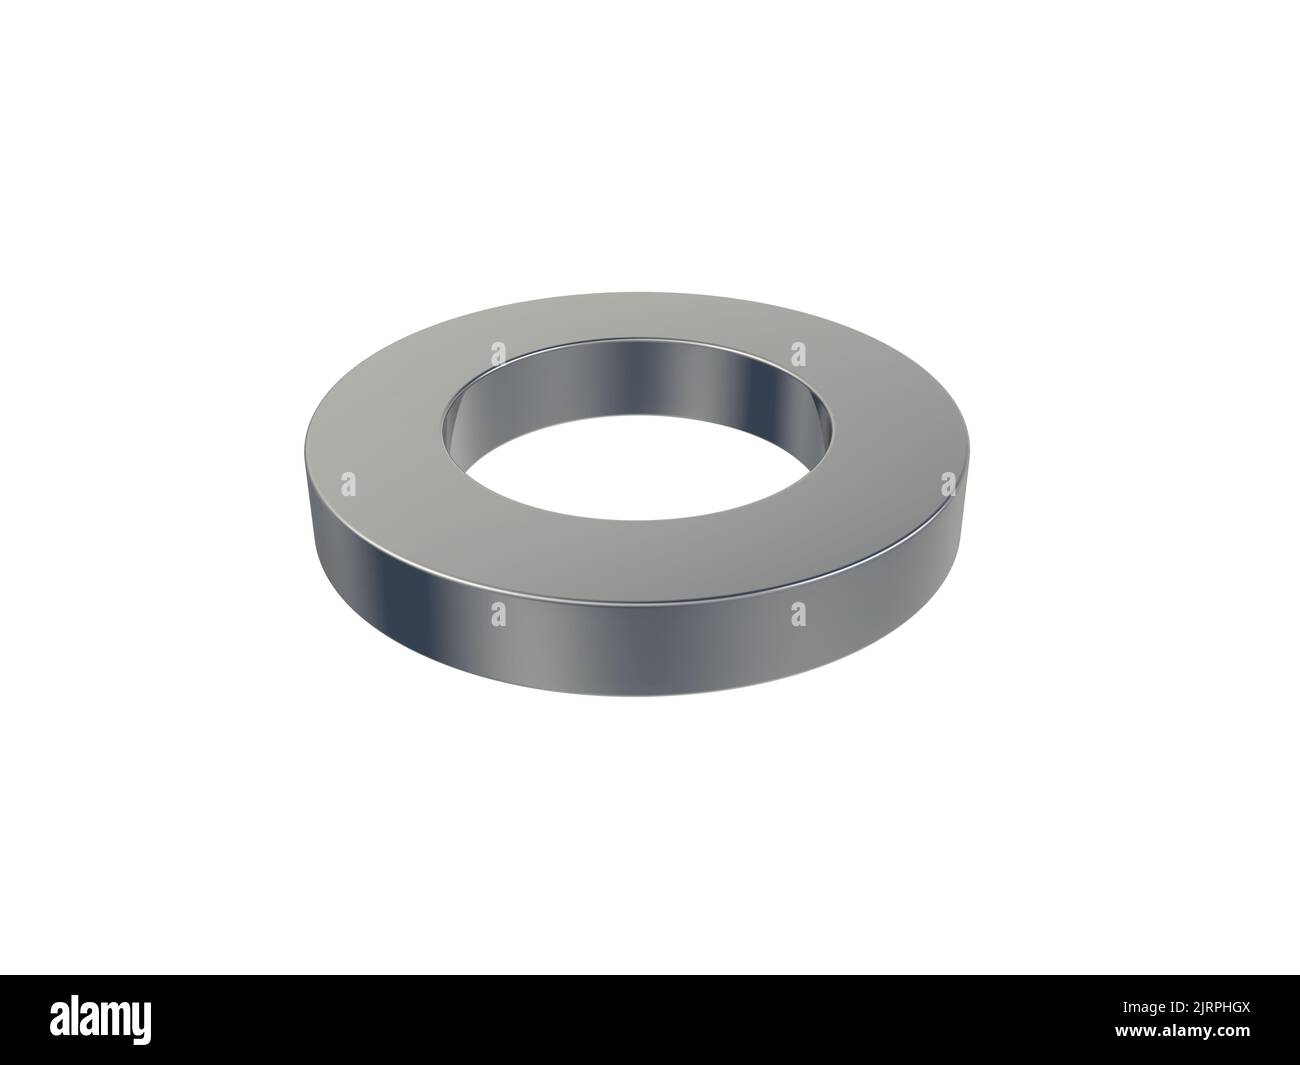 Metal ring isolated on white background. 3d illustration. Stock Photo